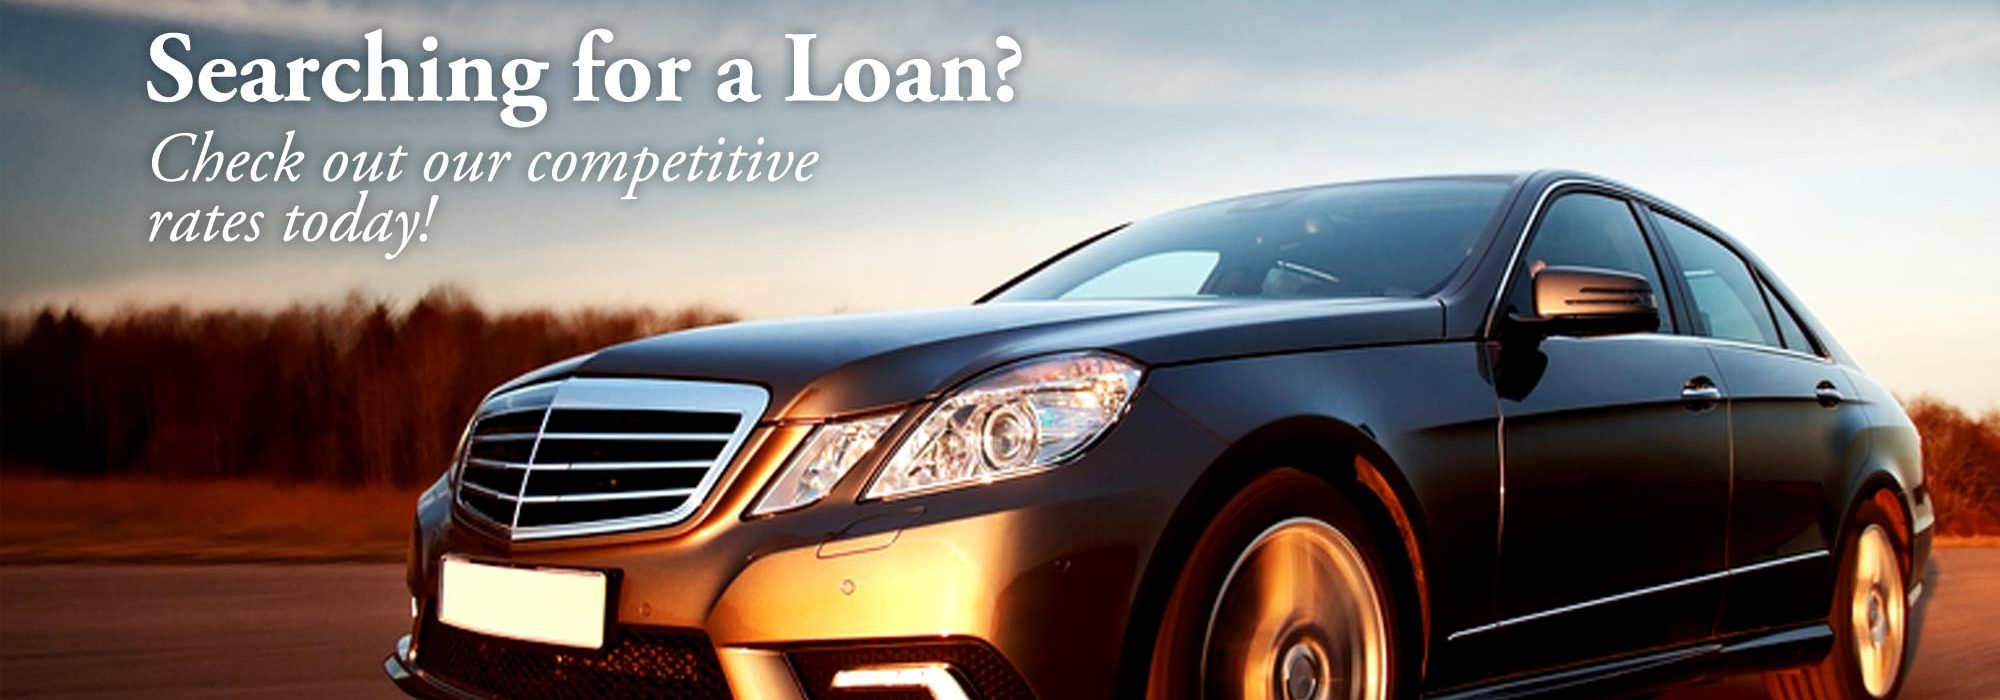 Competitive Loan Rates!